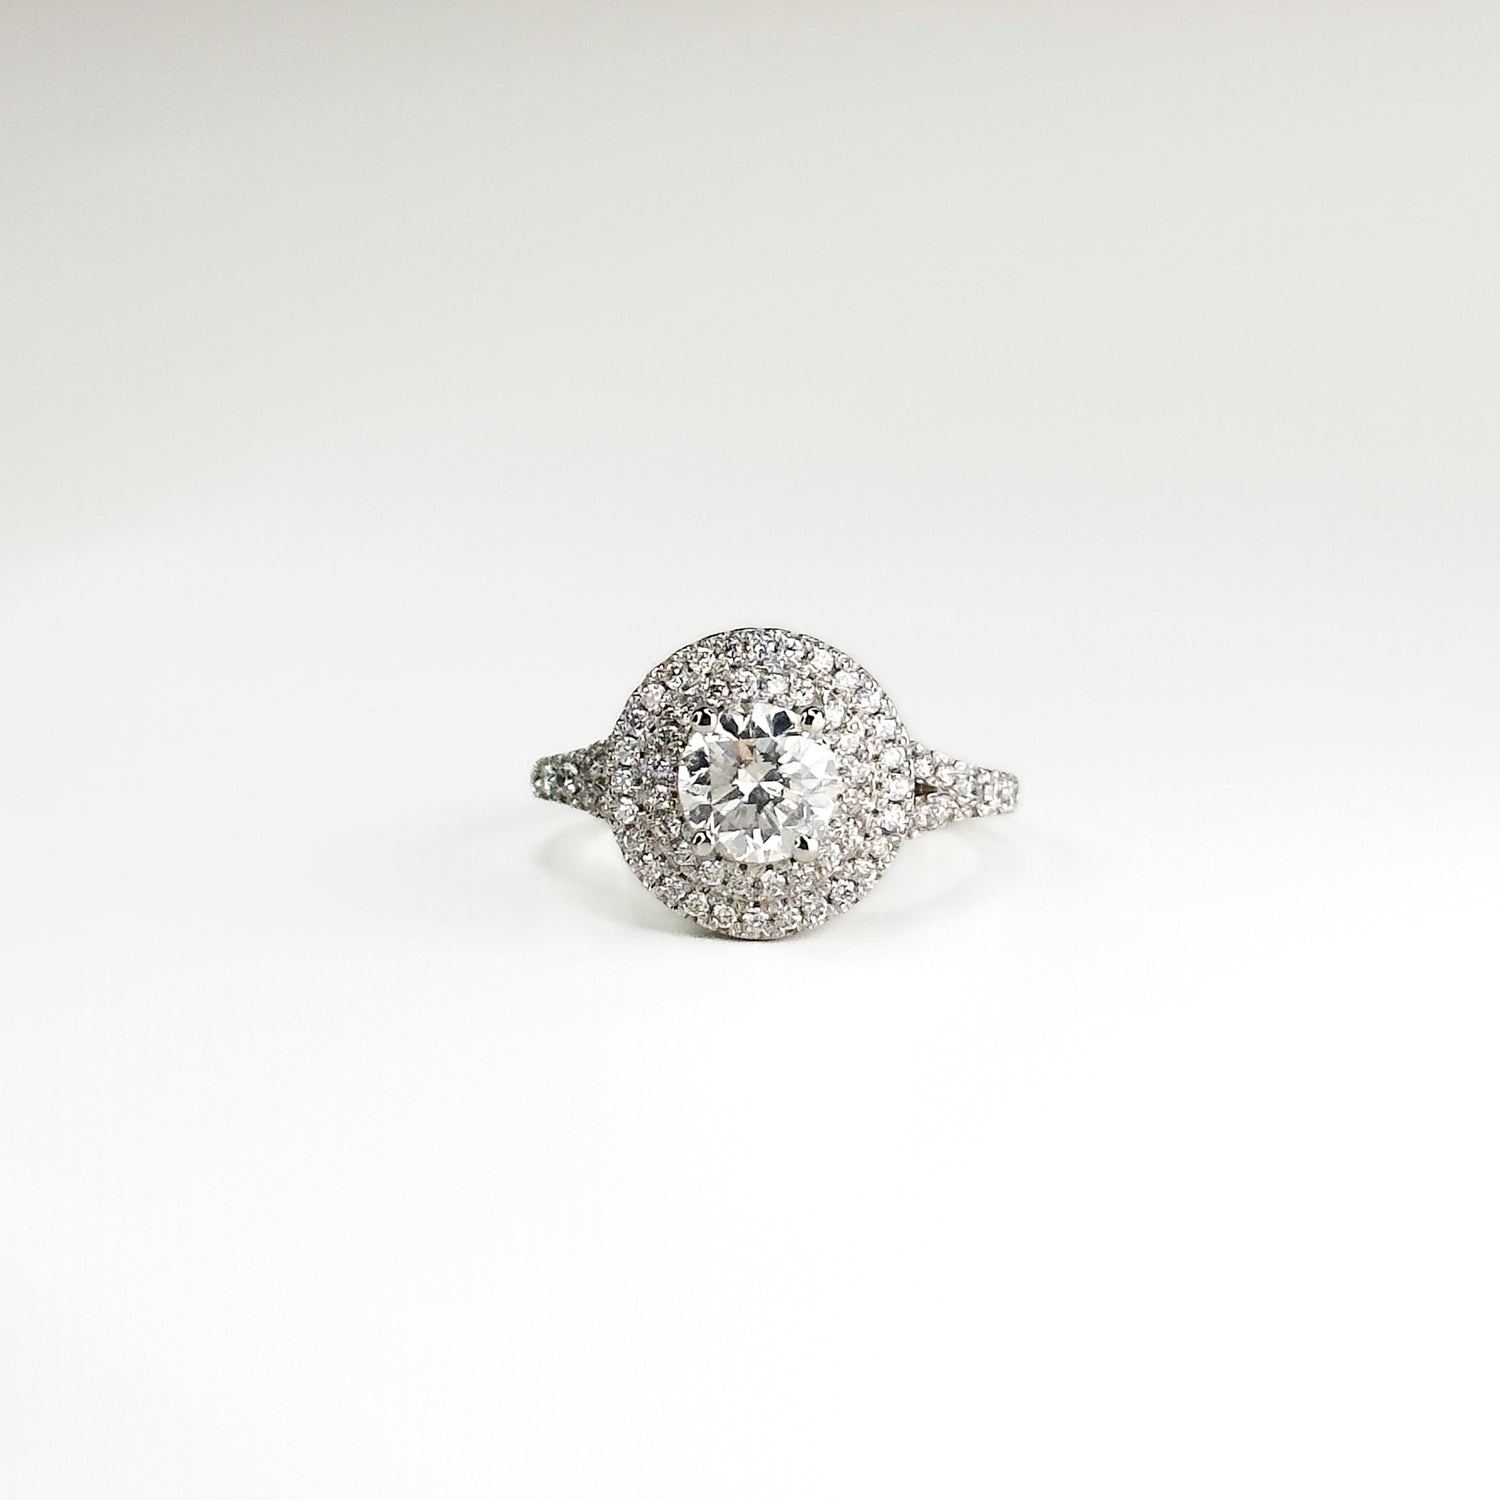 1.00ct Round Cut Diamond Platinum Ring with Double Halo